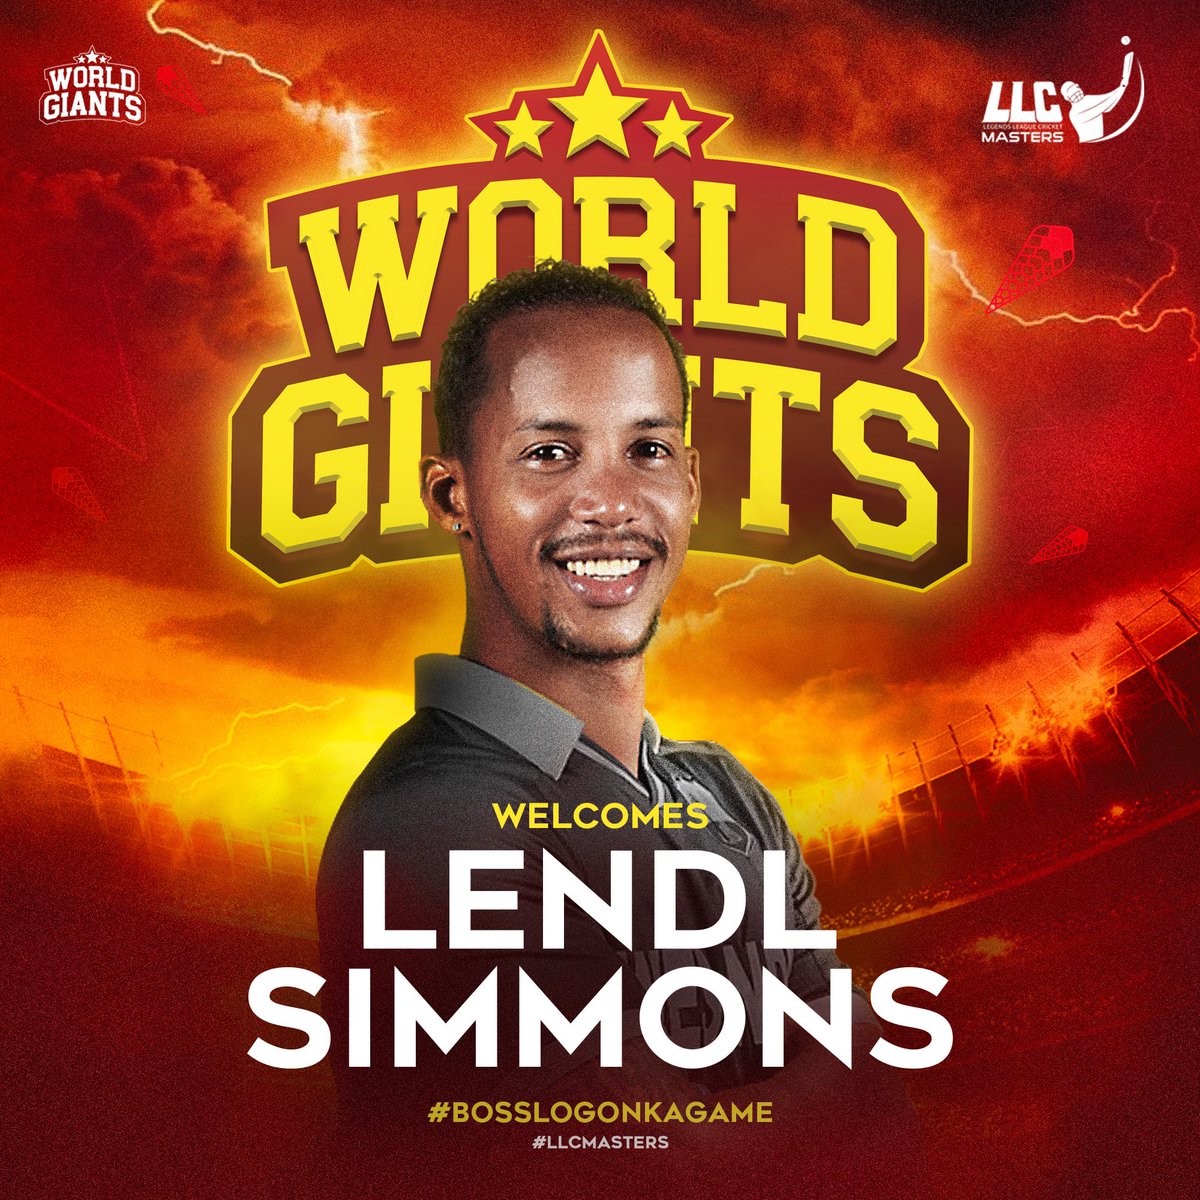 Welcome the Giant. @54simmo #LegendsLeagueCricket #LLCMasters #BossLogonKaGame